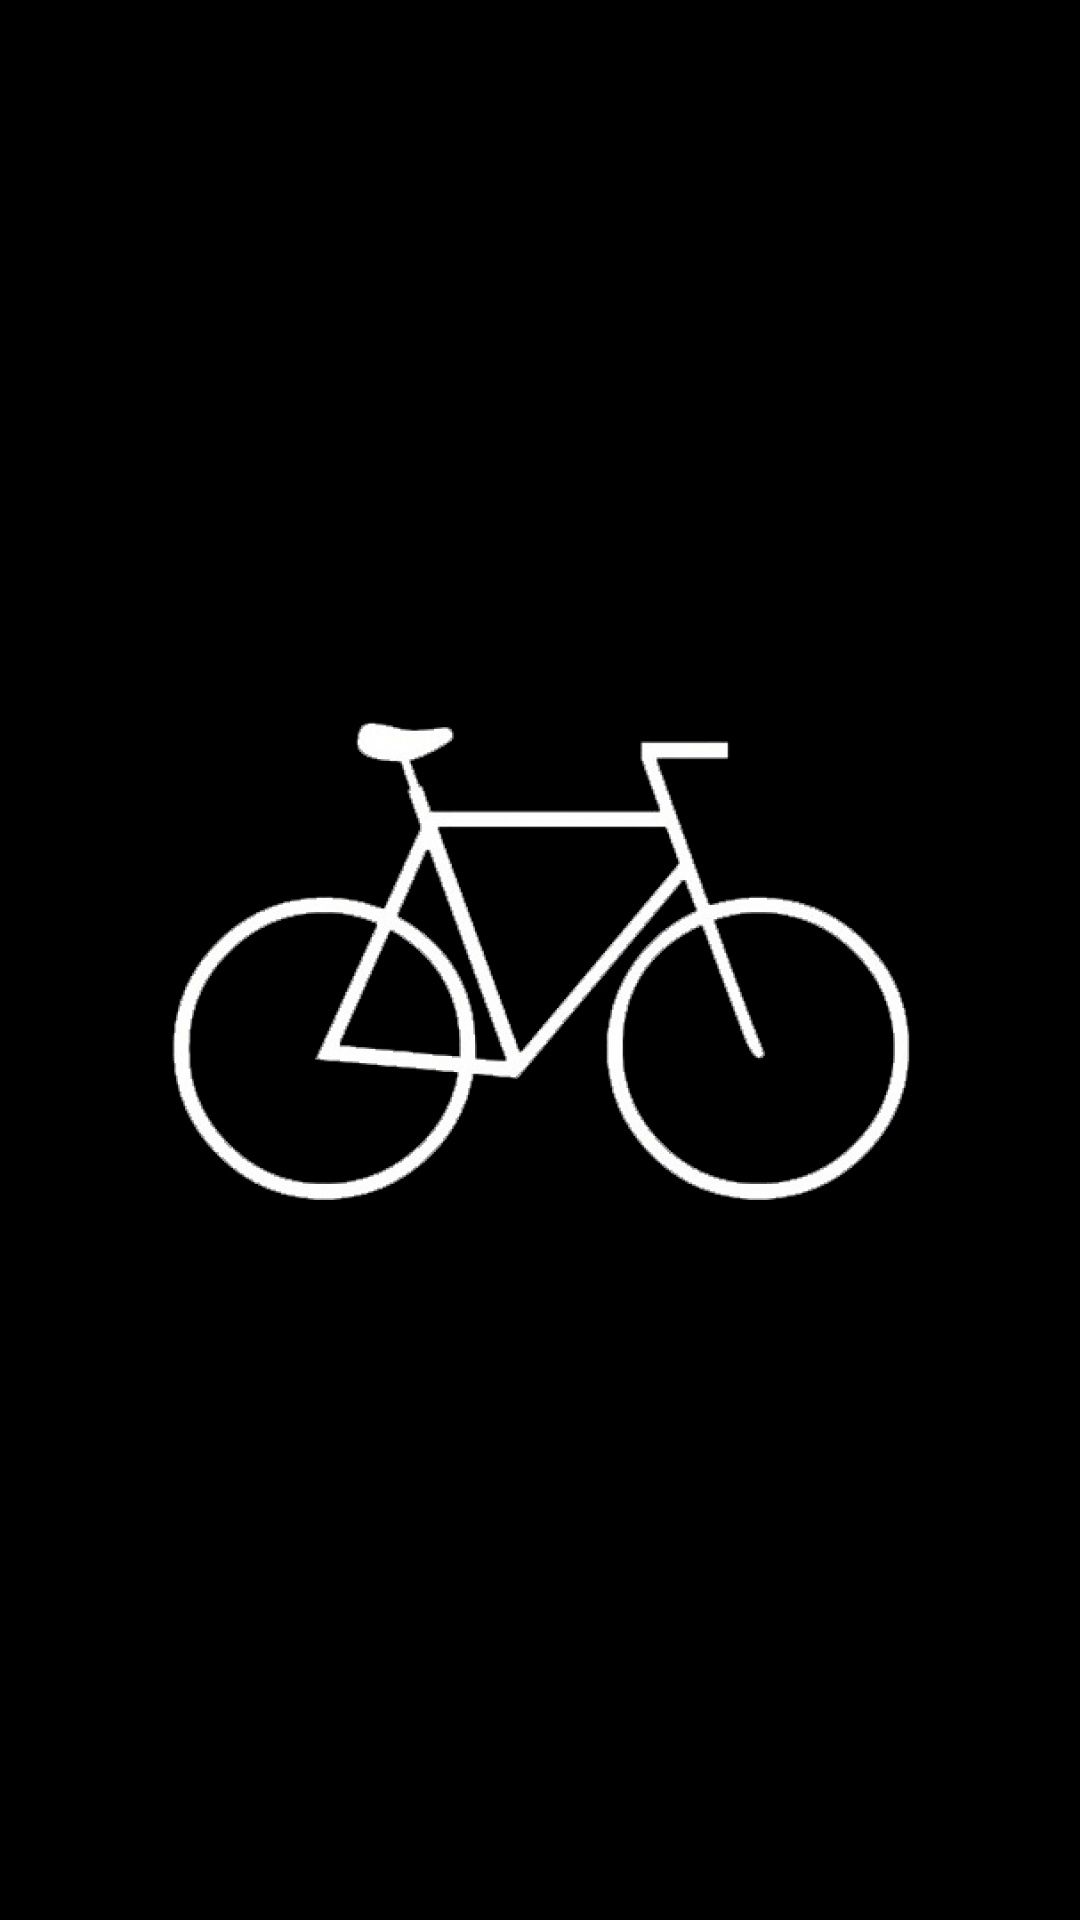 Flat Simple Bicycle Hipster iPhone 6 Plus HD Wallpaper HD